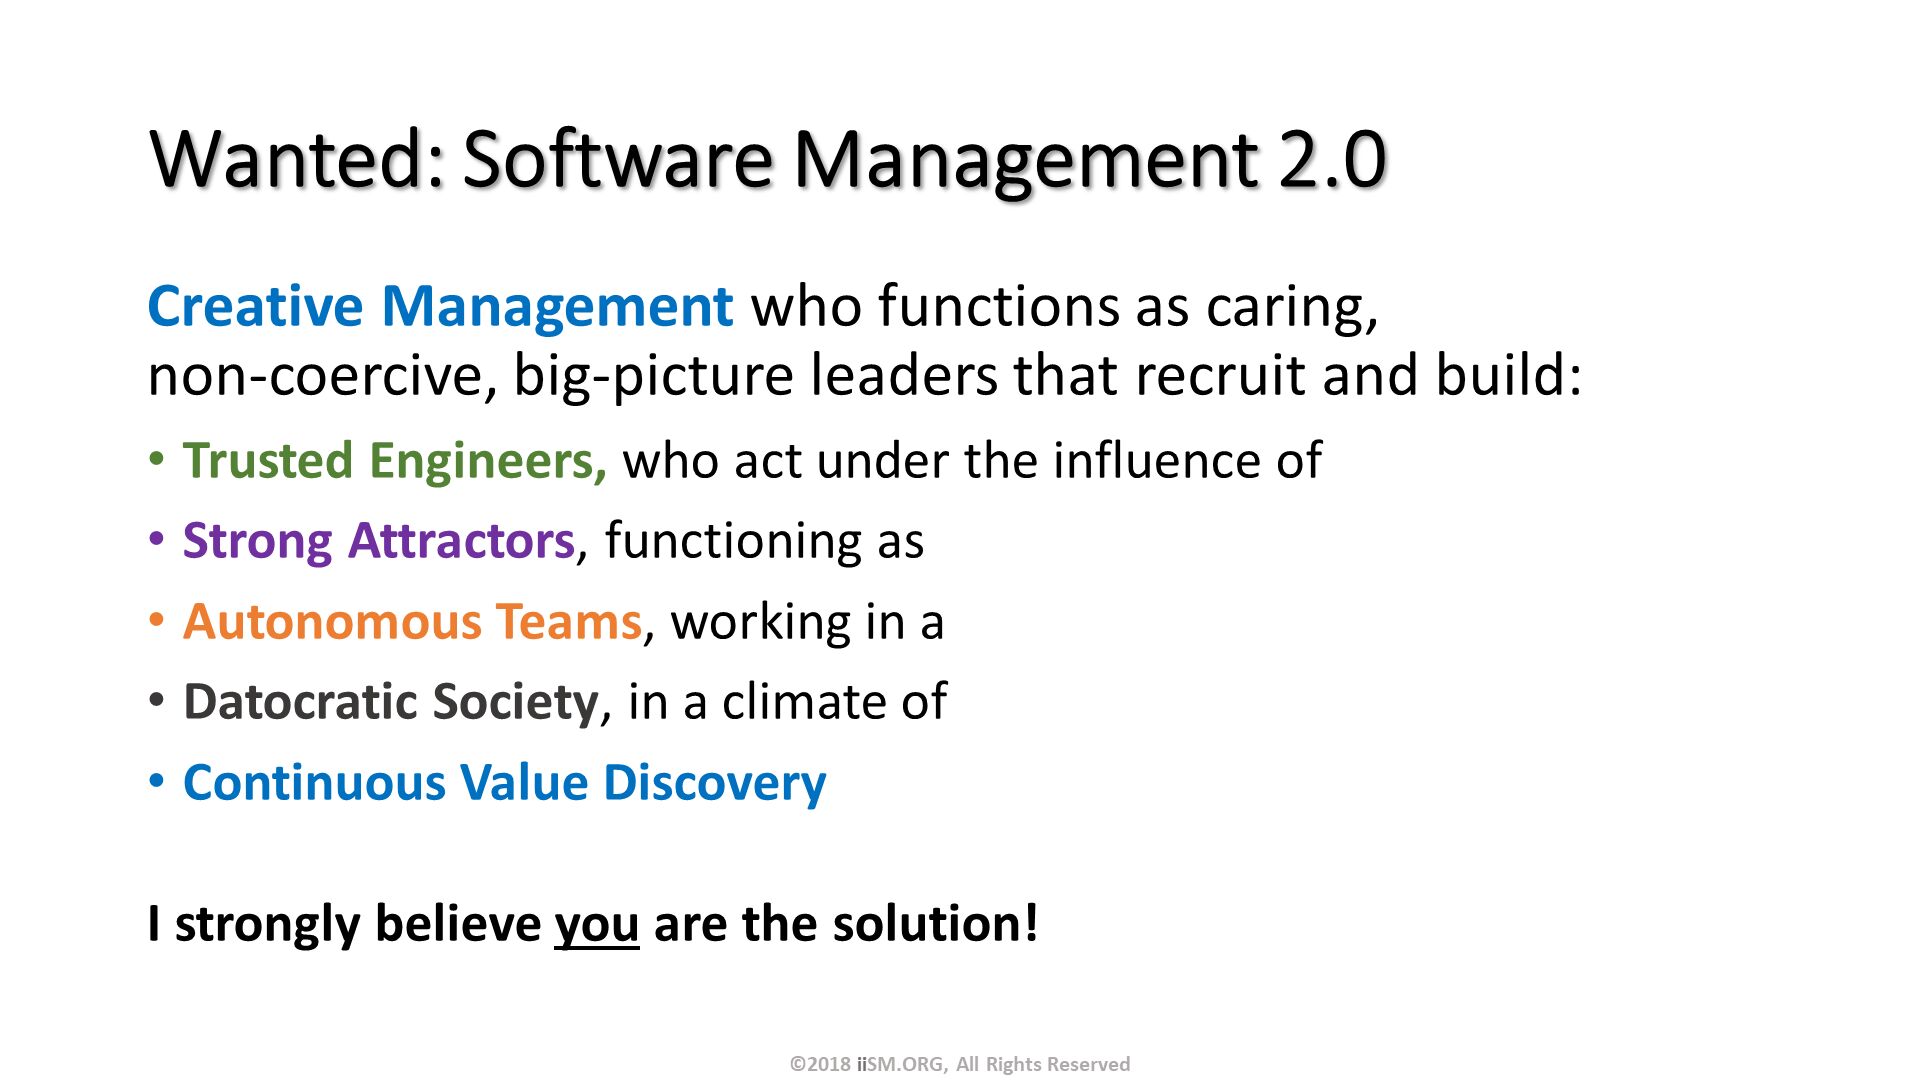 Wanted: Software Management 2.0. Creative Management who functions as caring, non-coercive, big-picture leaders that recruit and build:
Trusted Engineers, who act under the influence of
Strong Attractors, functioning as 
Autonomous Teams, working in a
Datocratic Society, in a climate of
Continuous Value Discovery
I strongly believe you are the solution!. ©2018 iiSM.ORG, All Rights Reserved. 